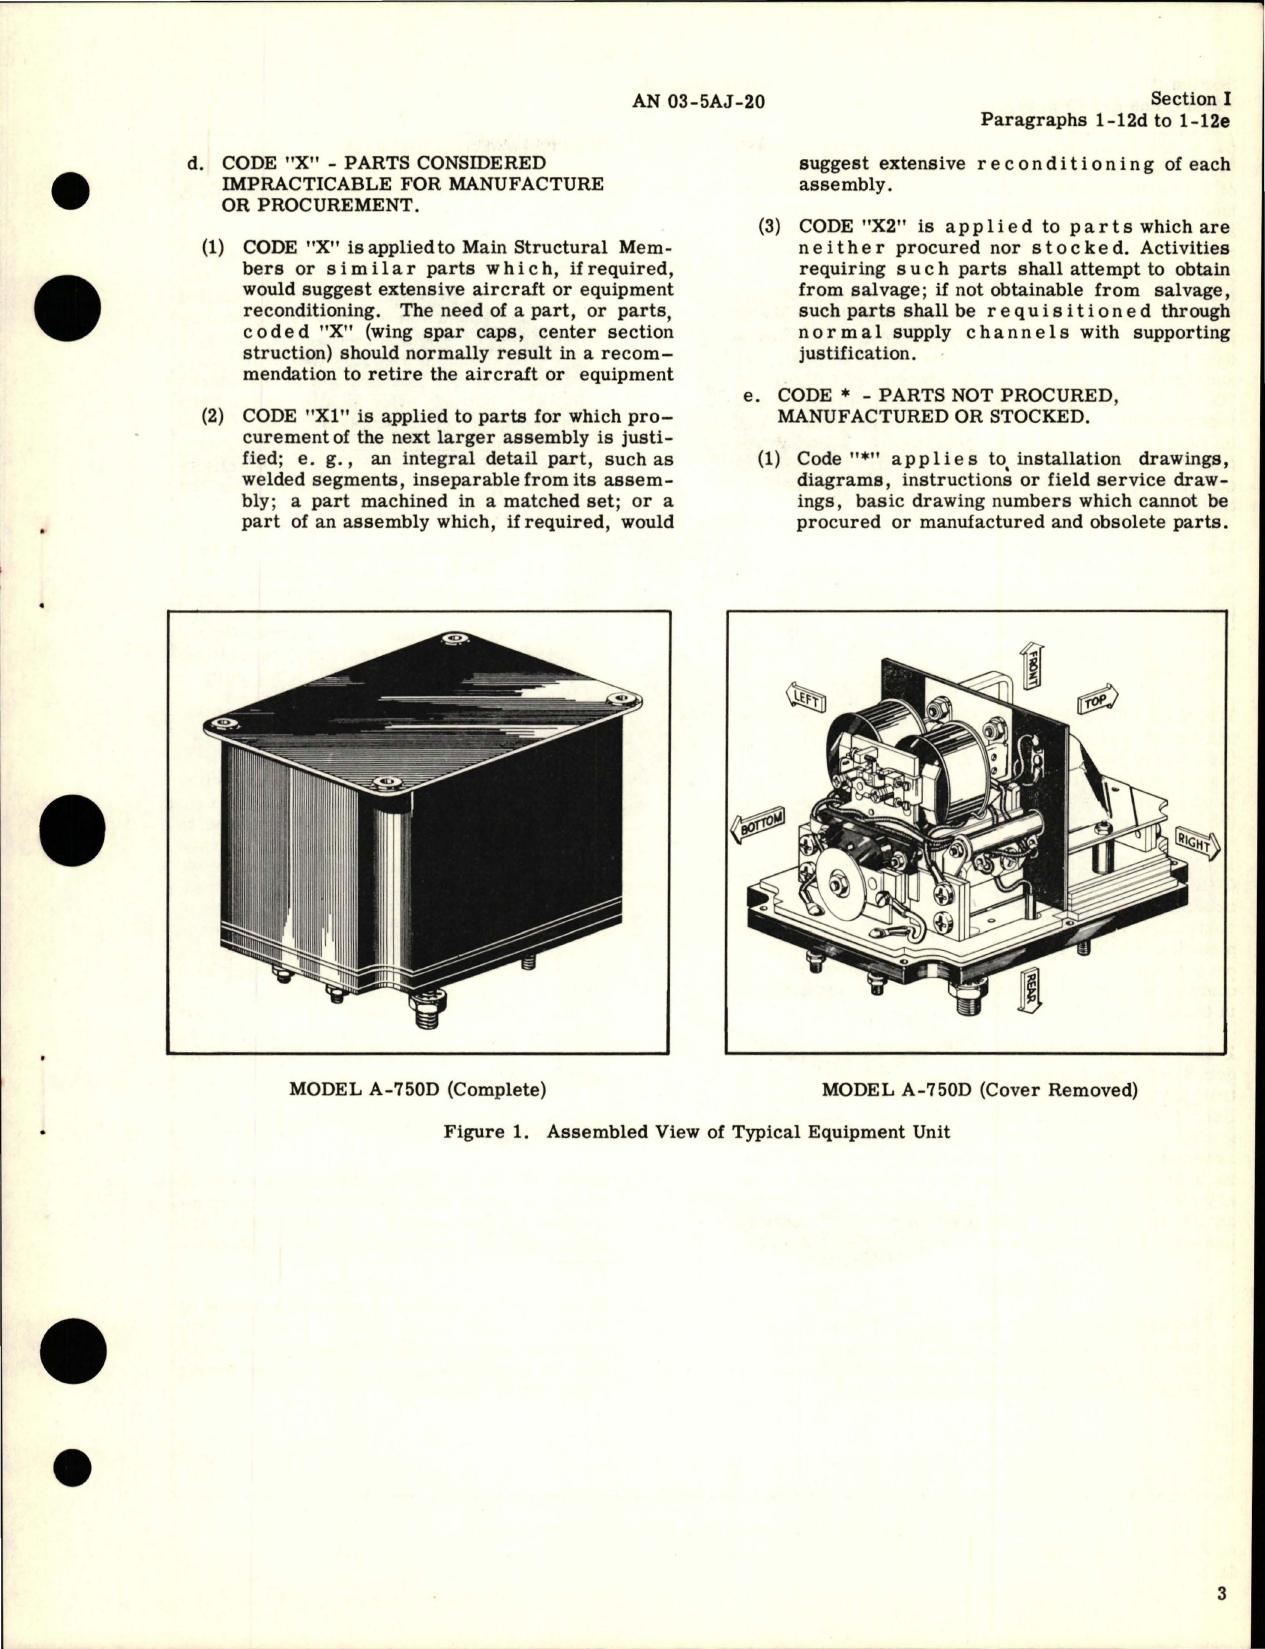 Sample page 5 from AirCorps Library document: Illustrated Parts Breakdown for Reverse Current Cutout - Model A-750D, Contractors - Models A-751D and A-751E 